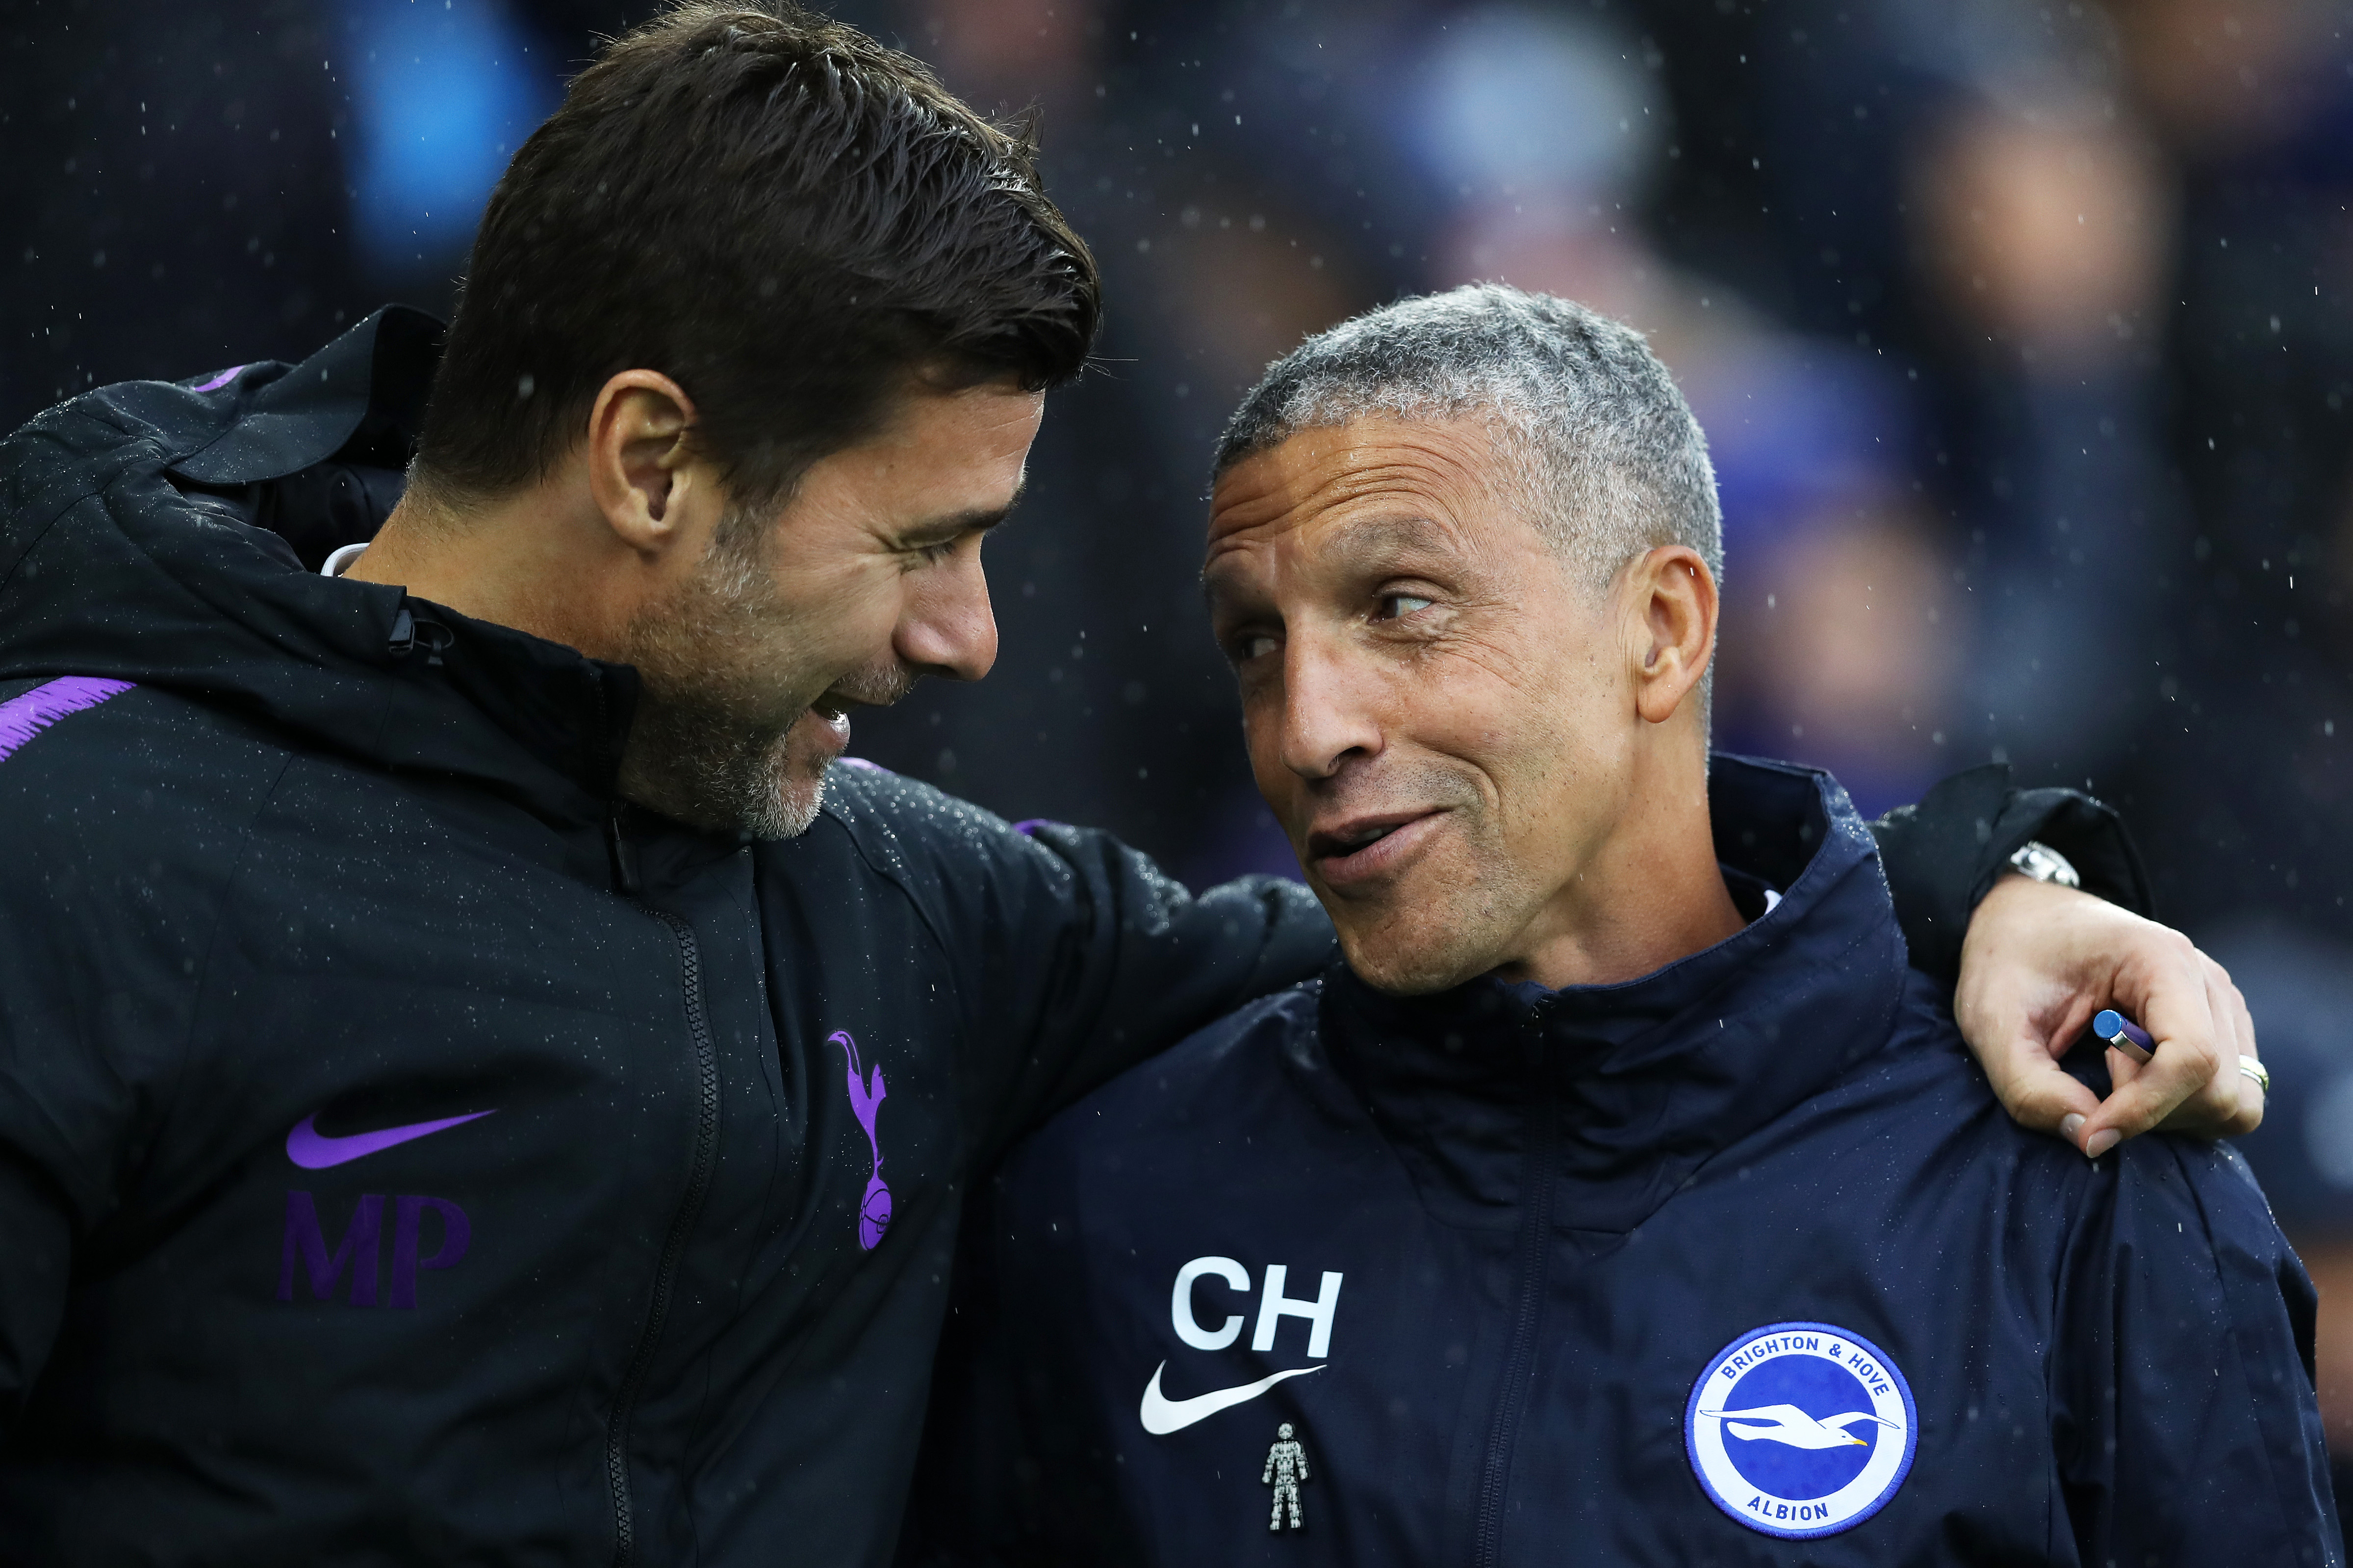 BRIGHTON, ENGLAND - SEPTEMBER 22:  Mauricio Pochettino, Manager of Tottenham Hotspur and Chris Hughton, Manager of Brighton and Hove Albion embrace prior to the Premier League match between Brighton & Hove Albion and Tottenham Hotspur at American Express Community Stadium on September 22, 2018 in Brighton, United Kingdom.  (Photo by Dan Istitene/Getty Images)